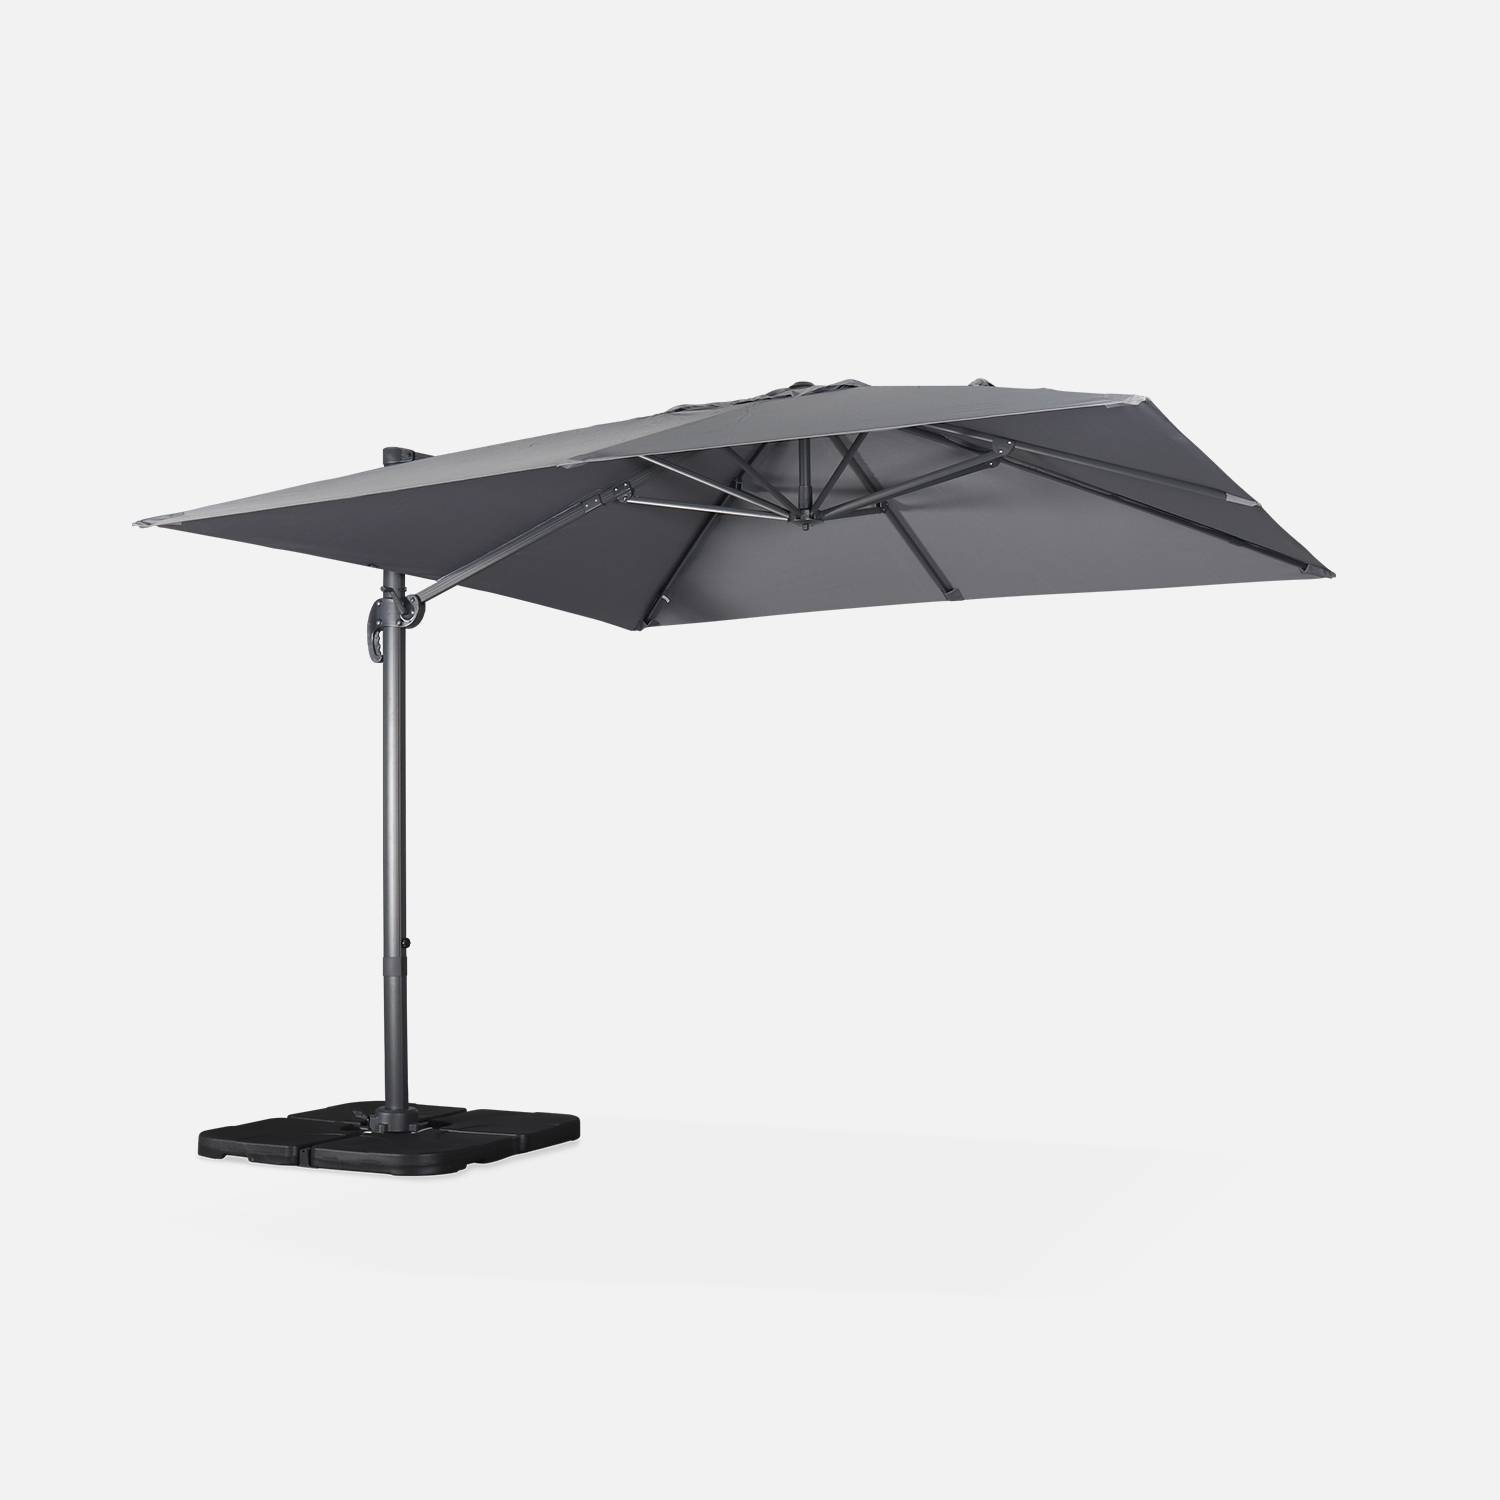 3x3m cantilever parasol + 50x50cm weighted slabs with protected cover included, Grey